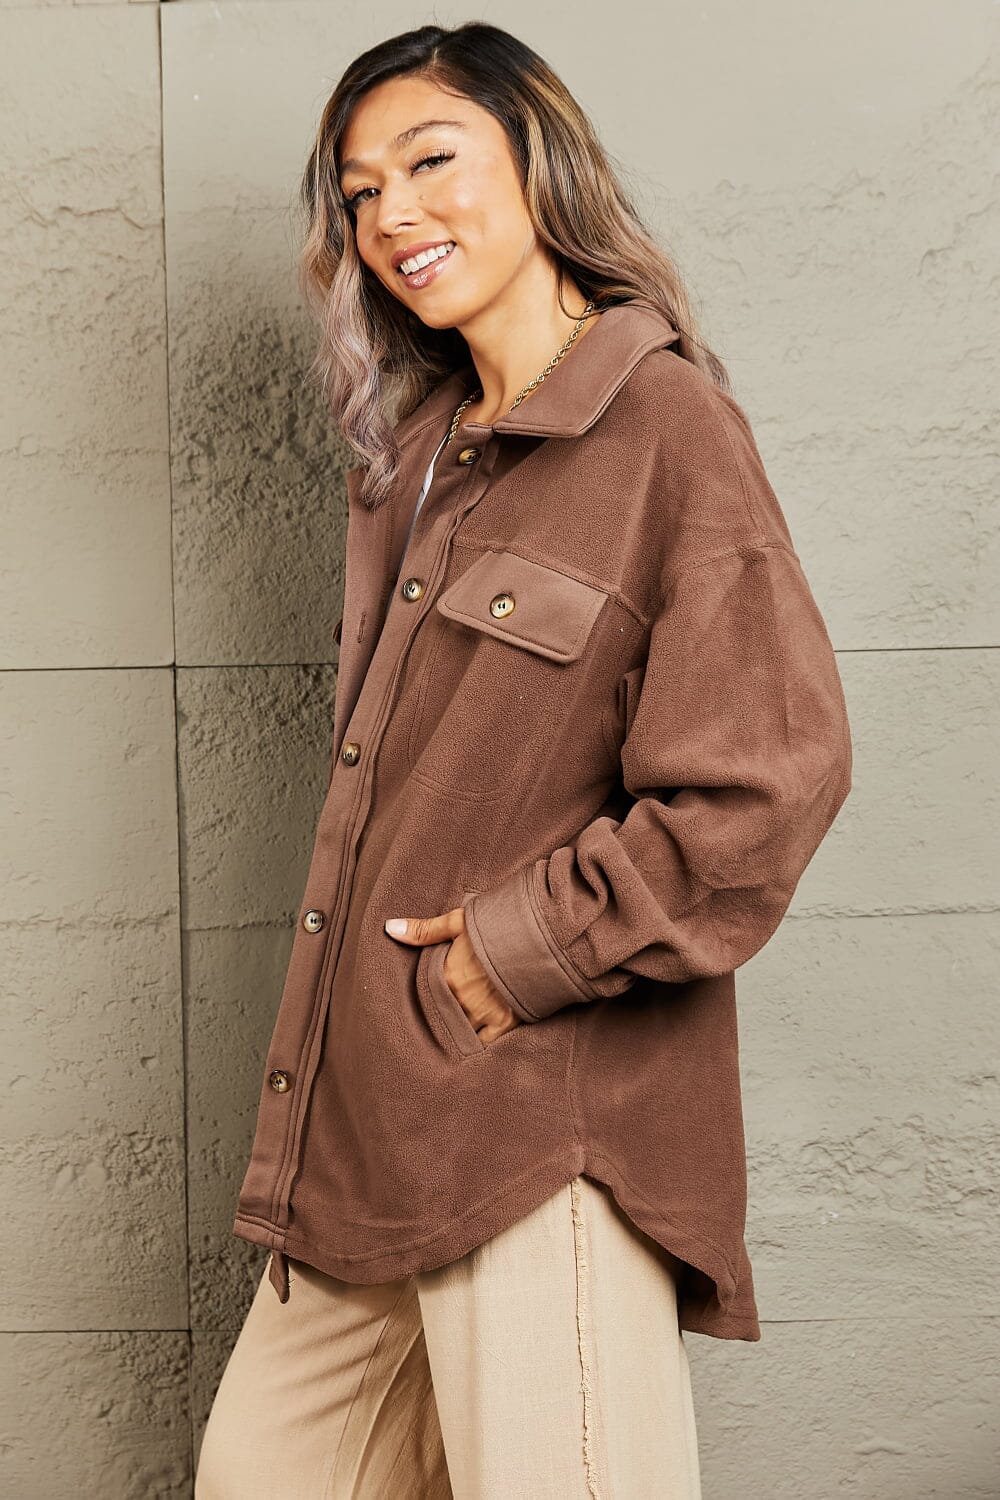 Heimish Coffee Brown Collared Neck Long Sleeves Button Down Shacket Coats & Jackets jehouze 